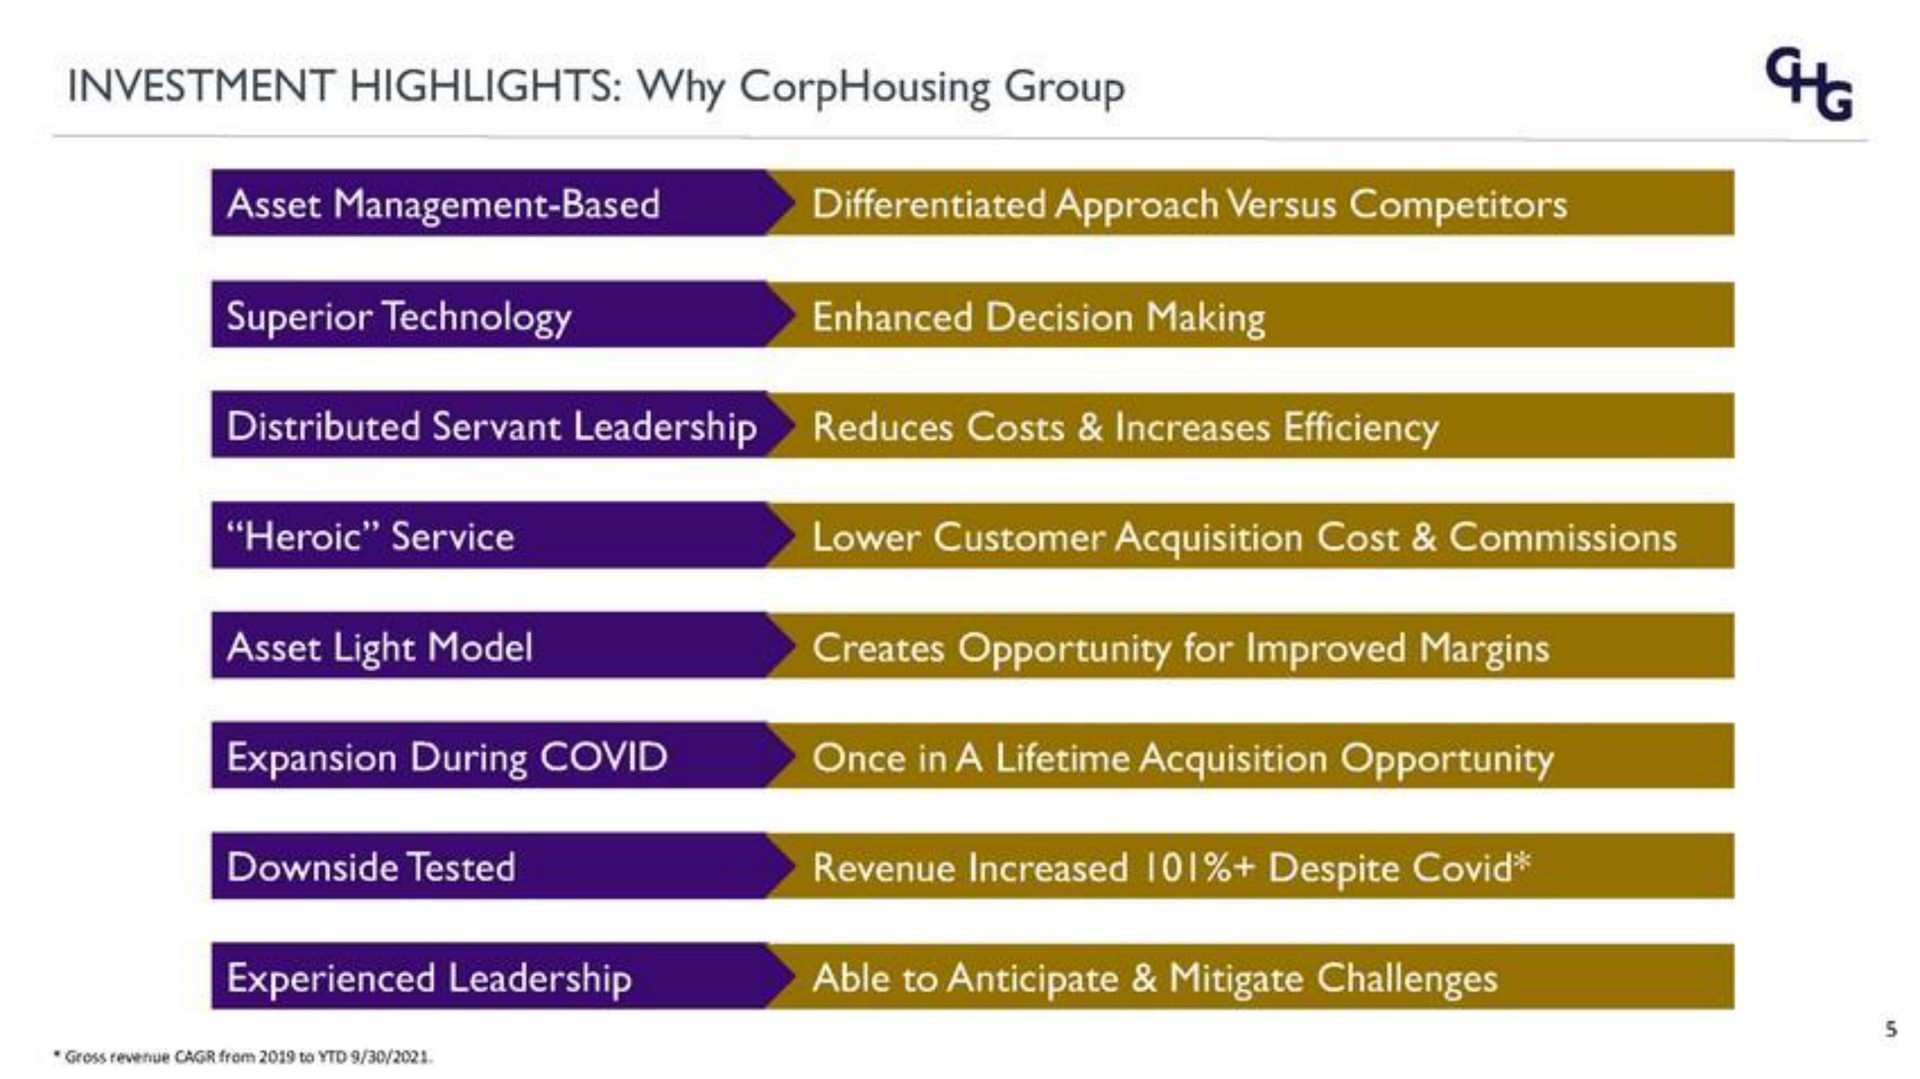 investment highlights why group asset management based differentiated approach versus competitors superior technology enhanced decision making distributed servant leadership reduces costs increases efficiency heroic service lower customer acquisition cost commissions asset light model expansion during covid creates opportunity for improved margins revenue increased despite covid able to anticipate mitigate challenges once lifetime acquisition opportunity experienced leadership downside tested | Corphousing Group